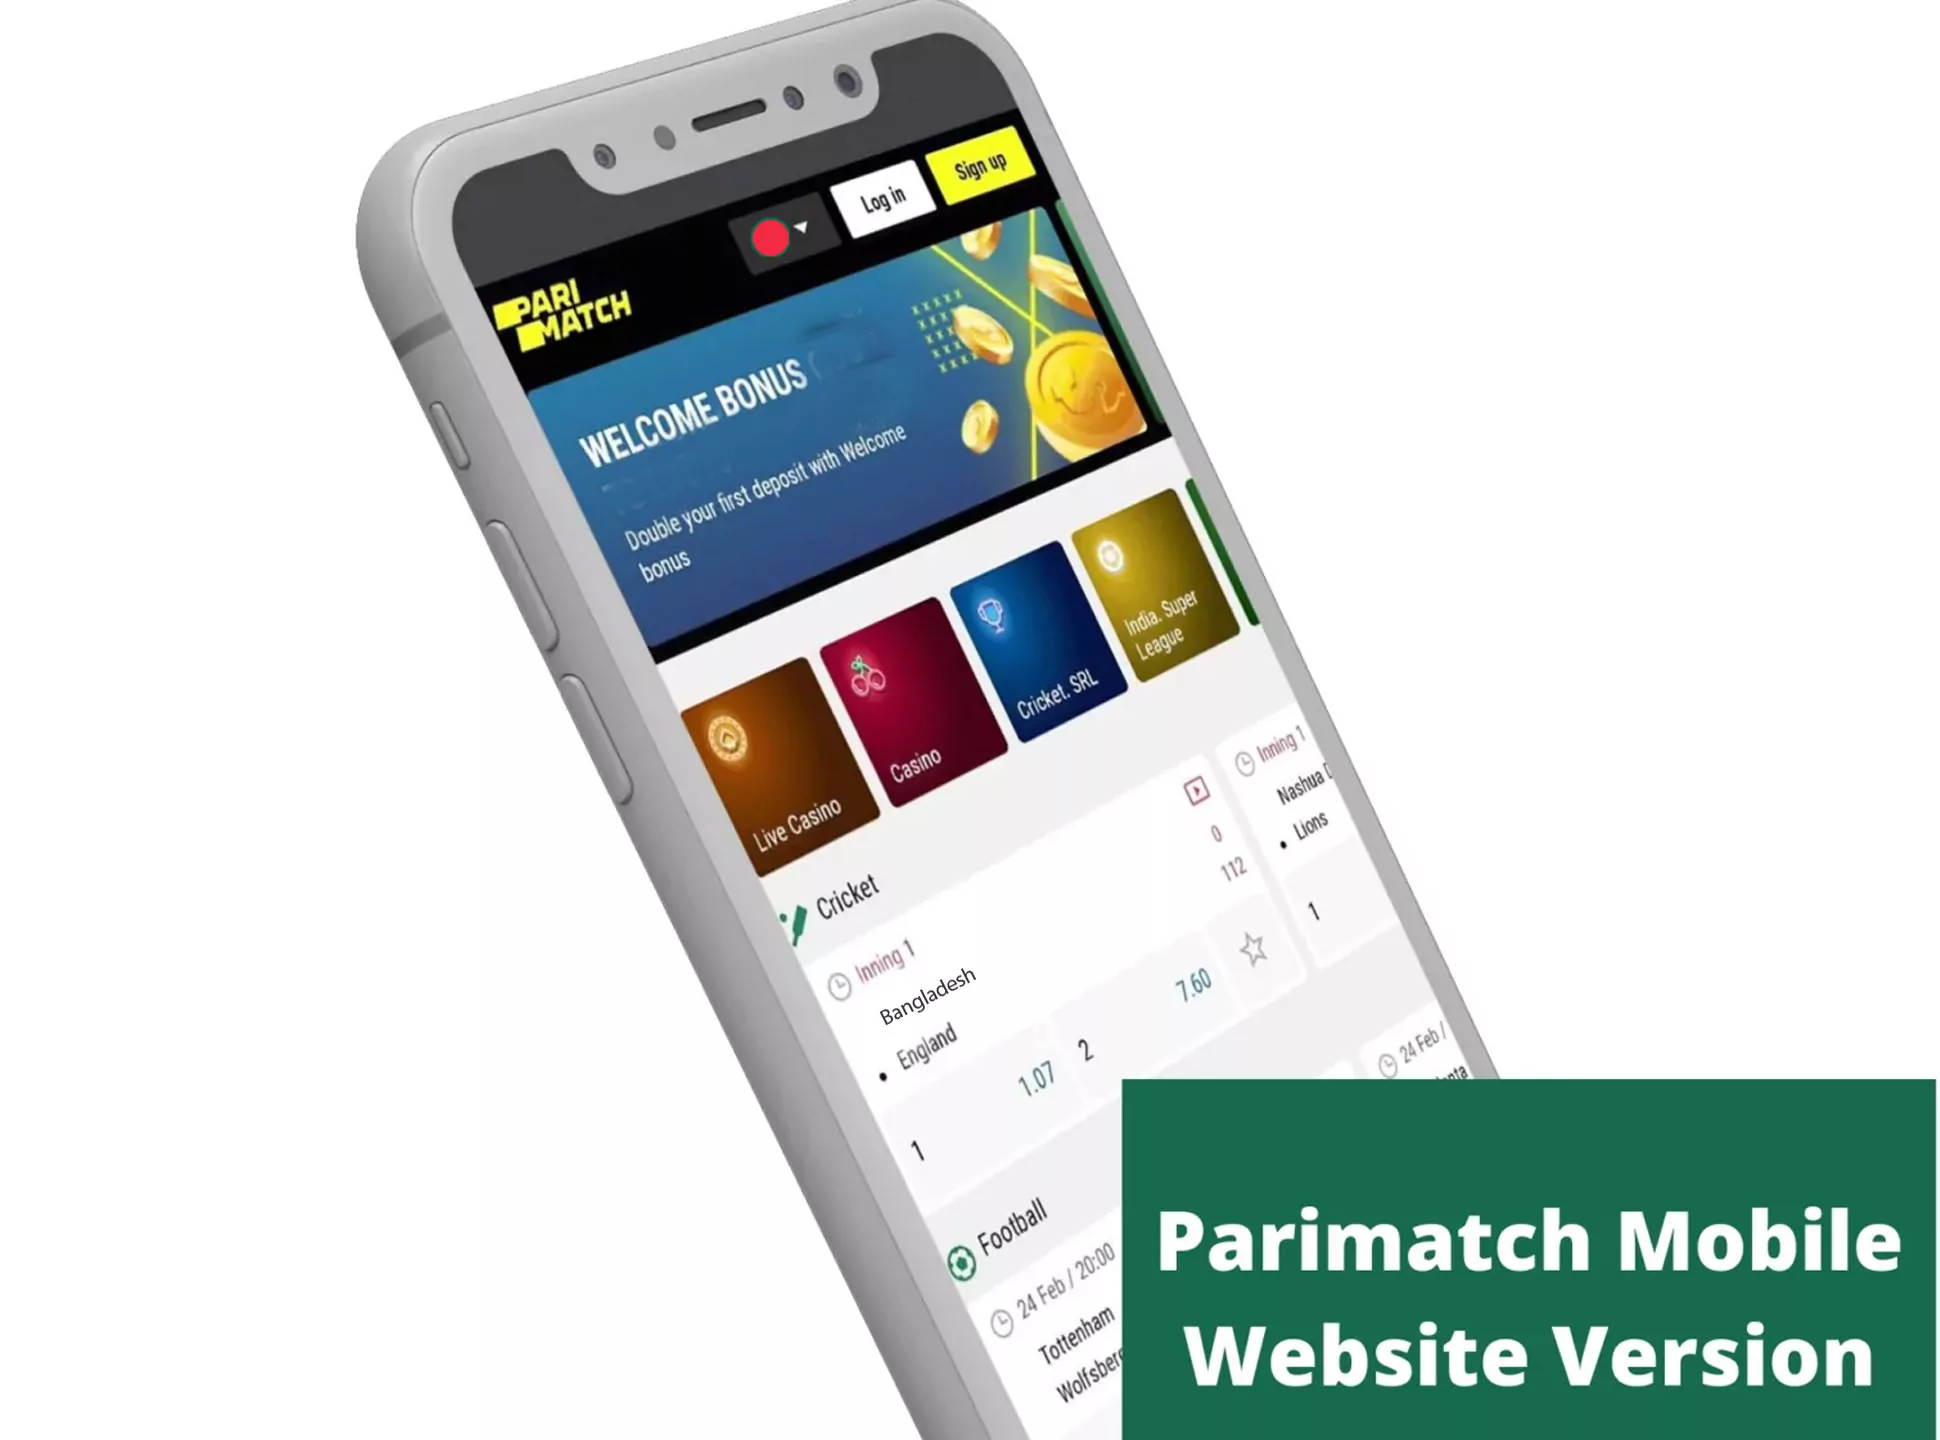 Parimatch mobile website version has the same functionality as app and website.